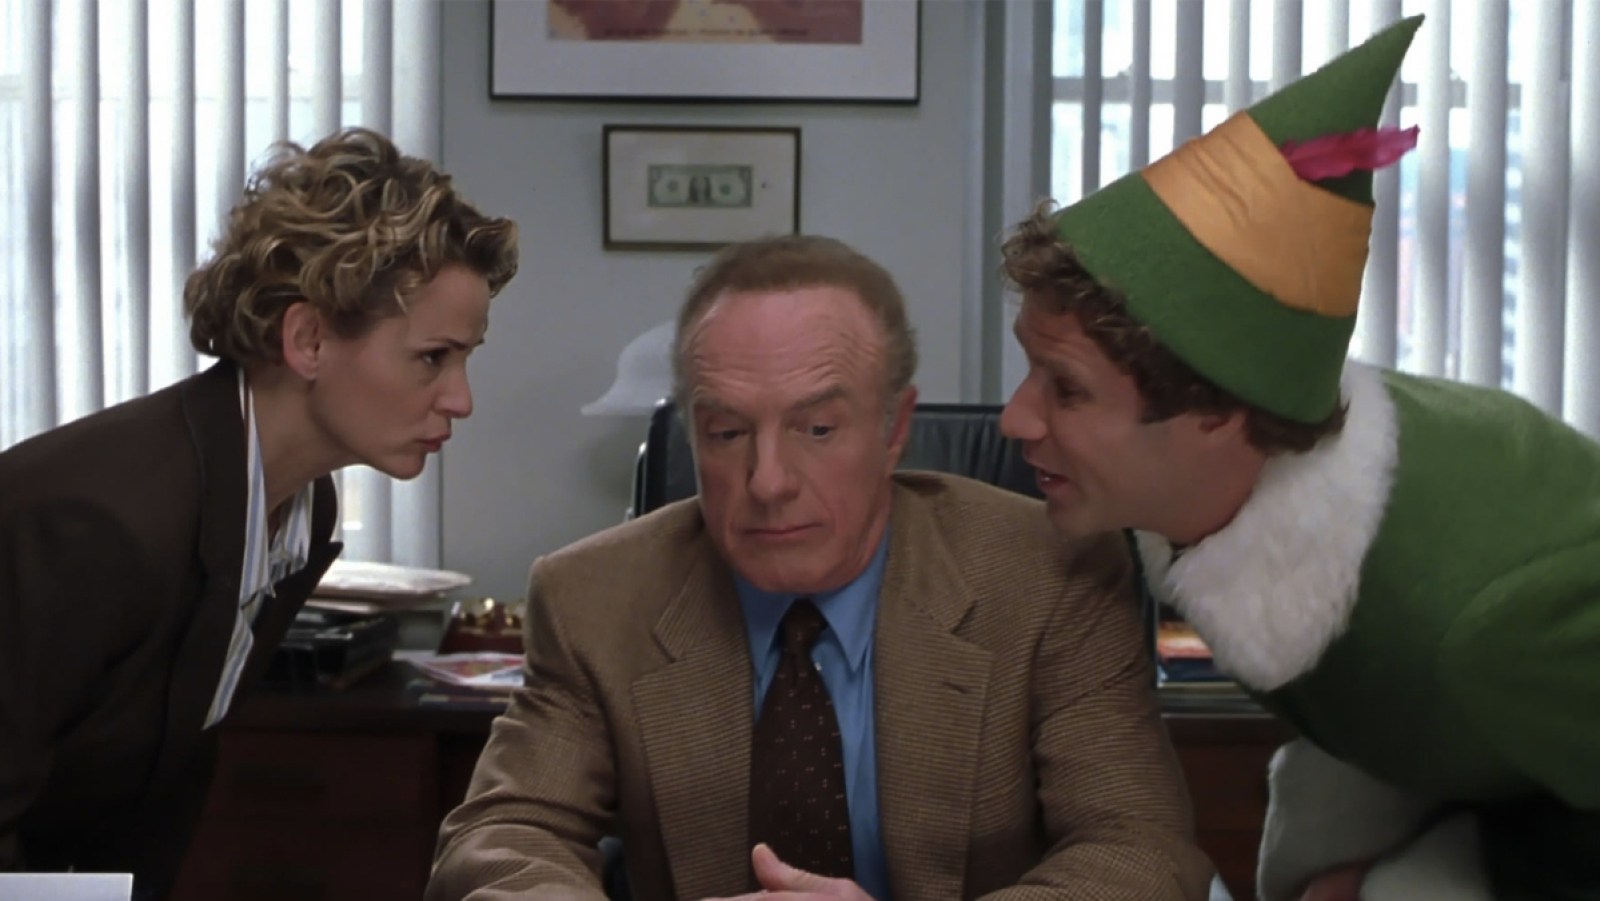 James Caan as Walter Hobbes and Will Ferrell as Elf Buddy